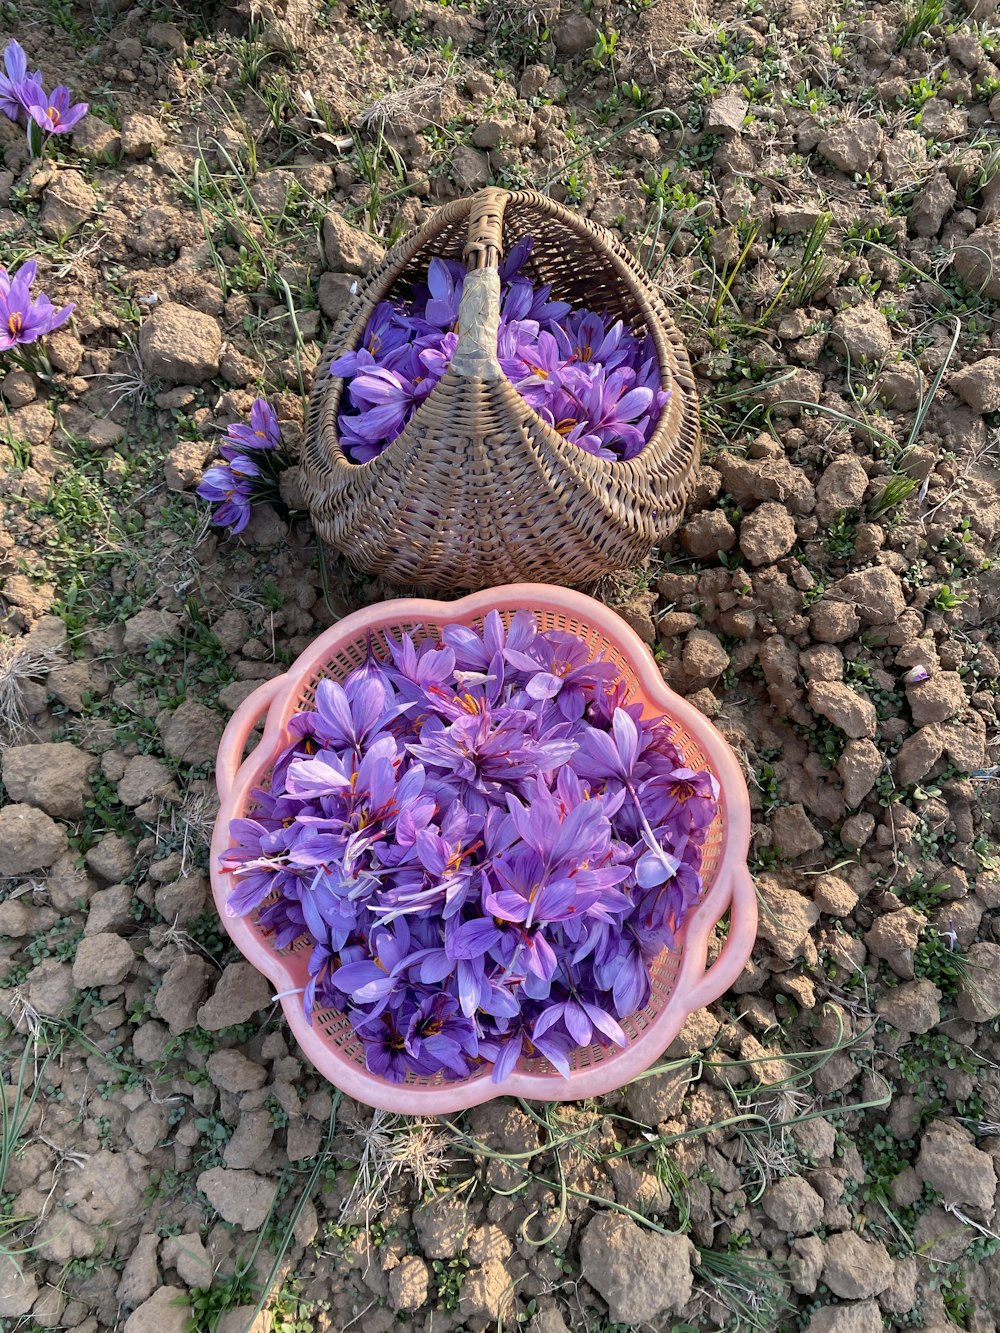 a basket full of purple flowers sitting on the ground